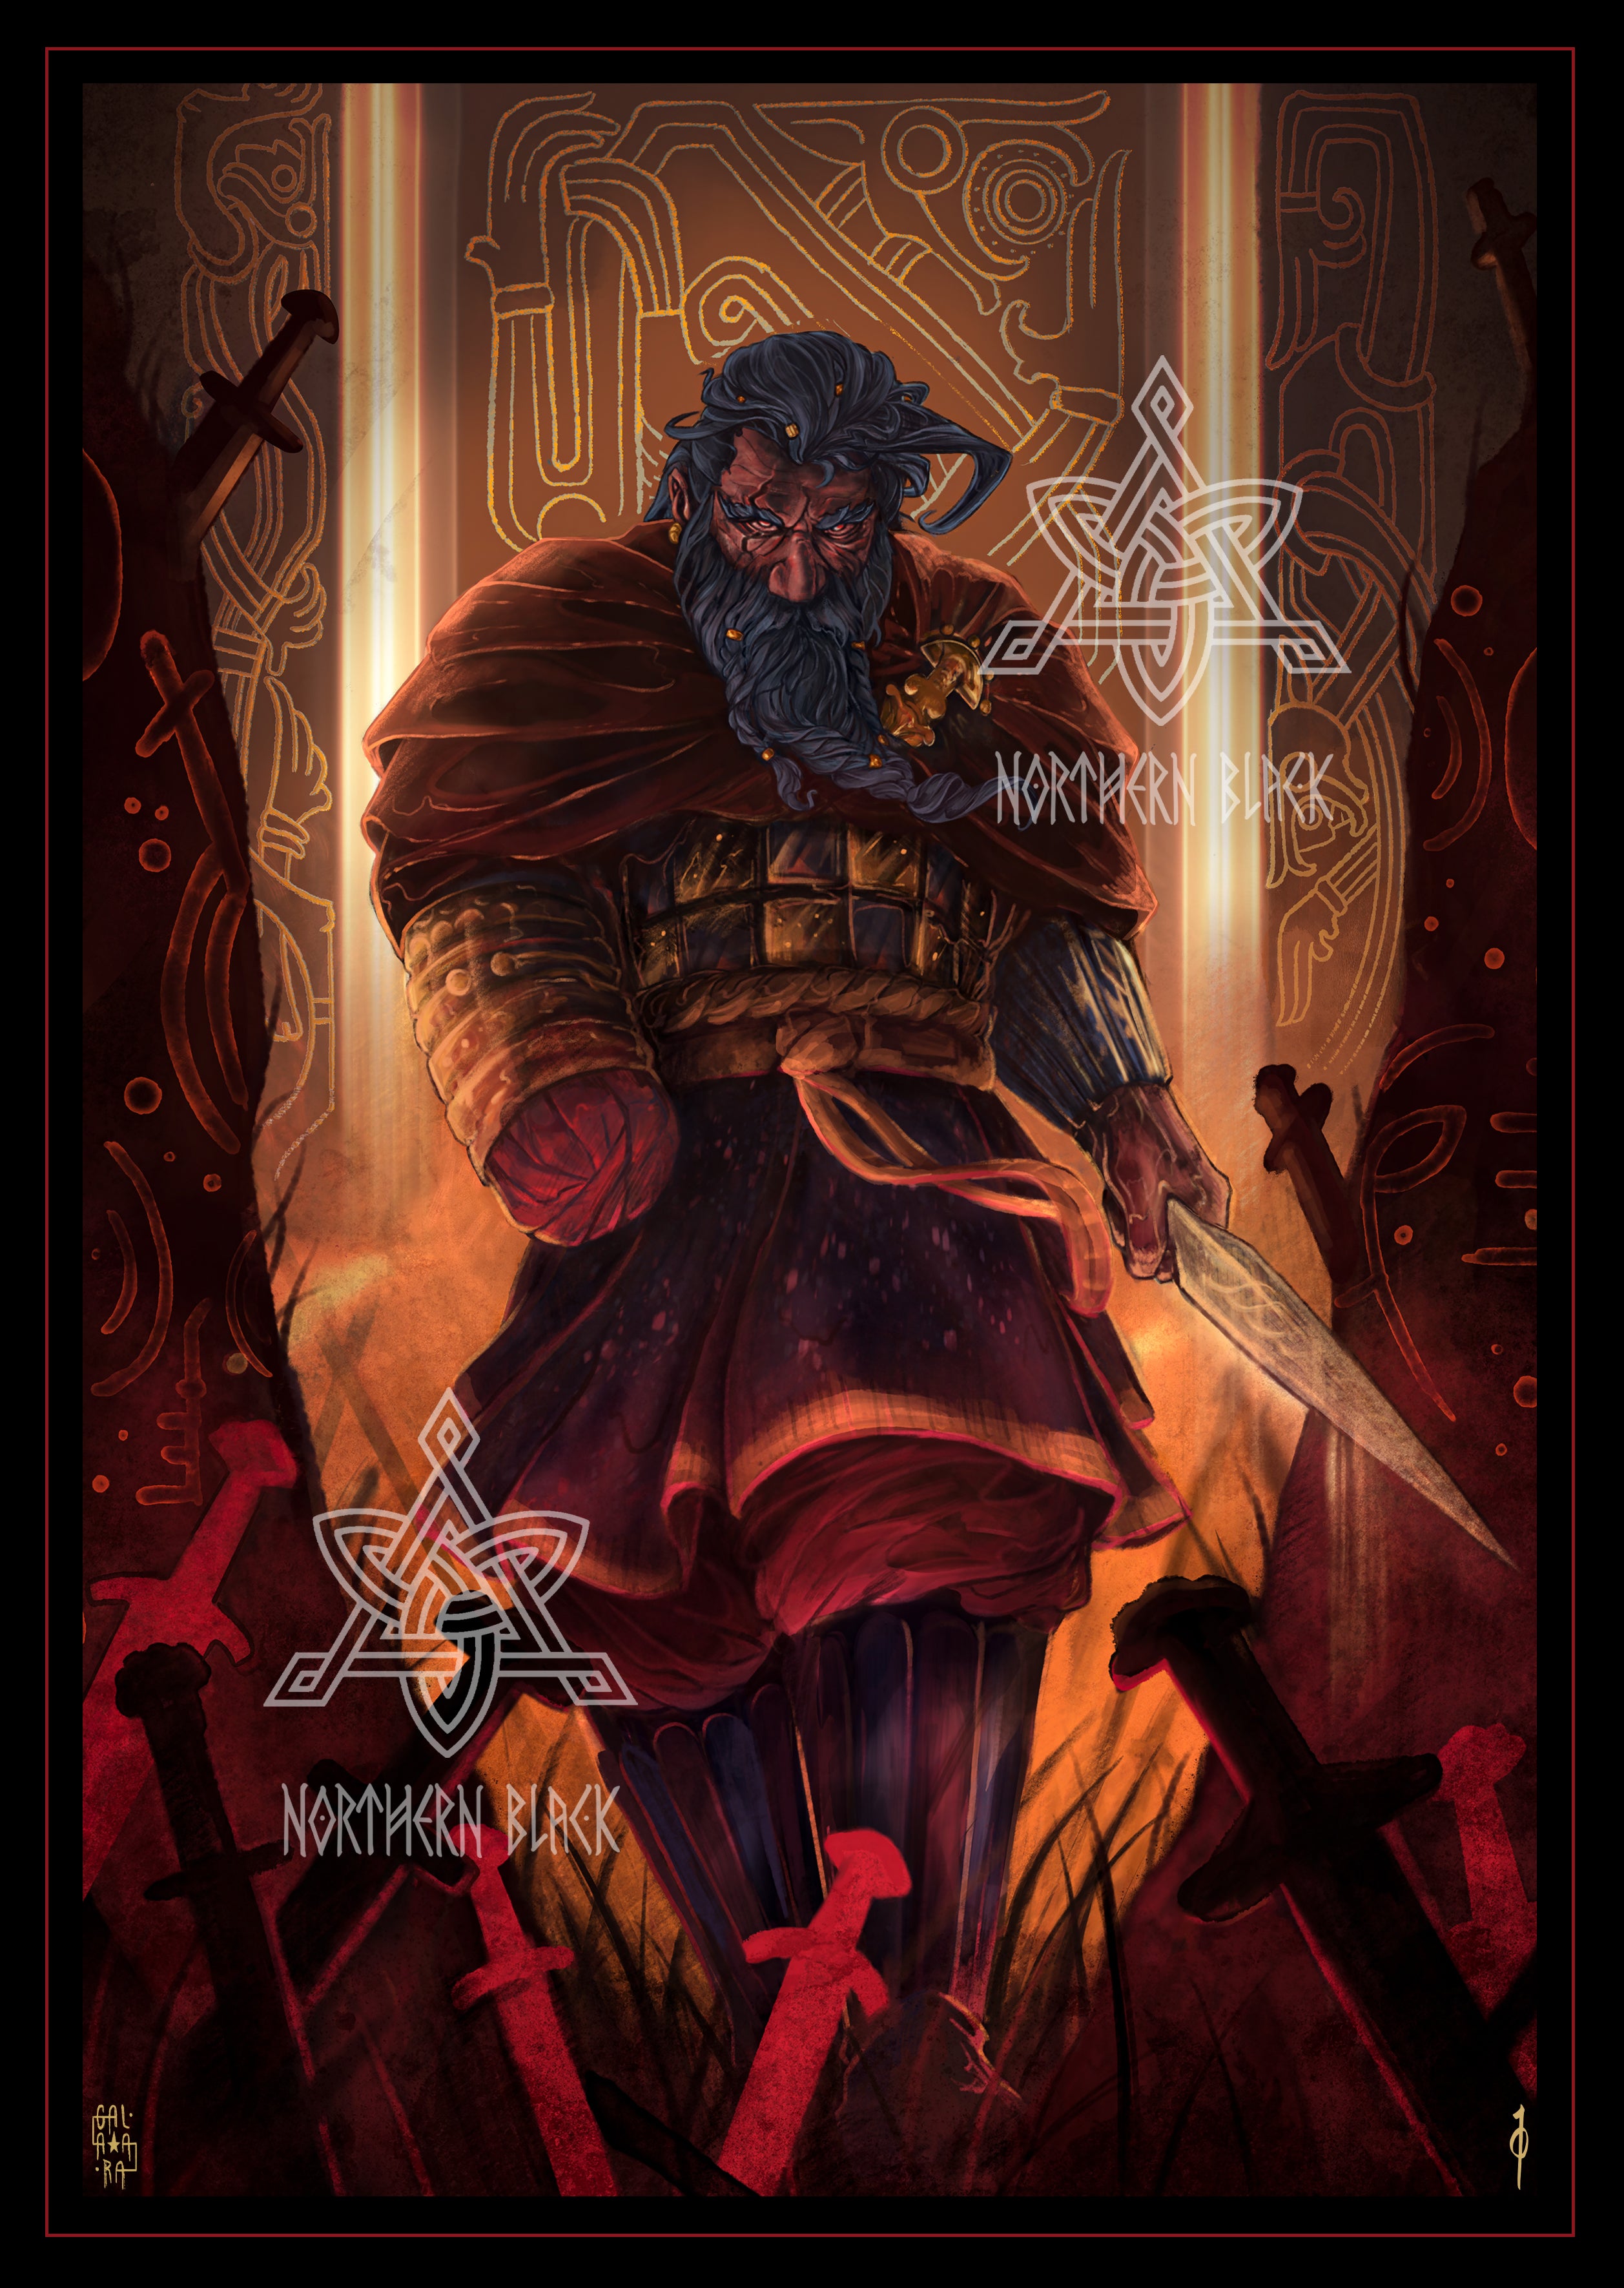 ART PRINT • MIGHTY TALES OF THE NORTH • TYR